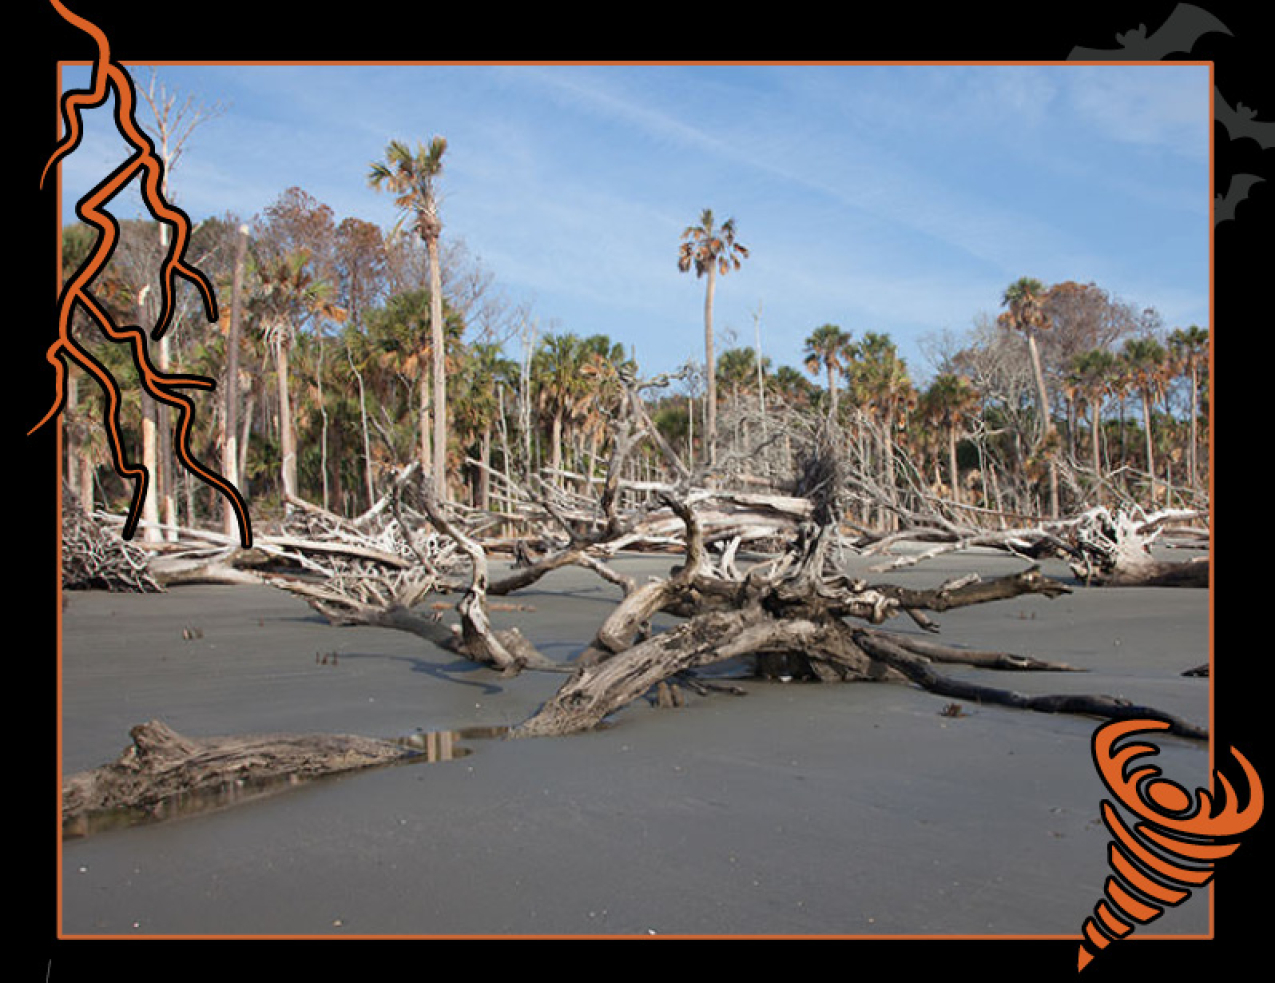 The watery remains of a once verdant woodland. Dead trees and broken limbs fill the beach. Border of the photo is black with orange atmospheric graphics of a lightning bolt and a tornado. Text: What is a ghost forest? #NOAASpookyScience with NOAA logo.